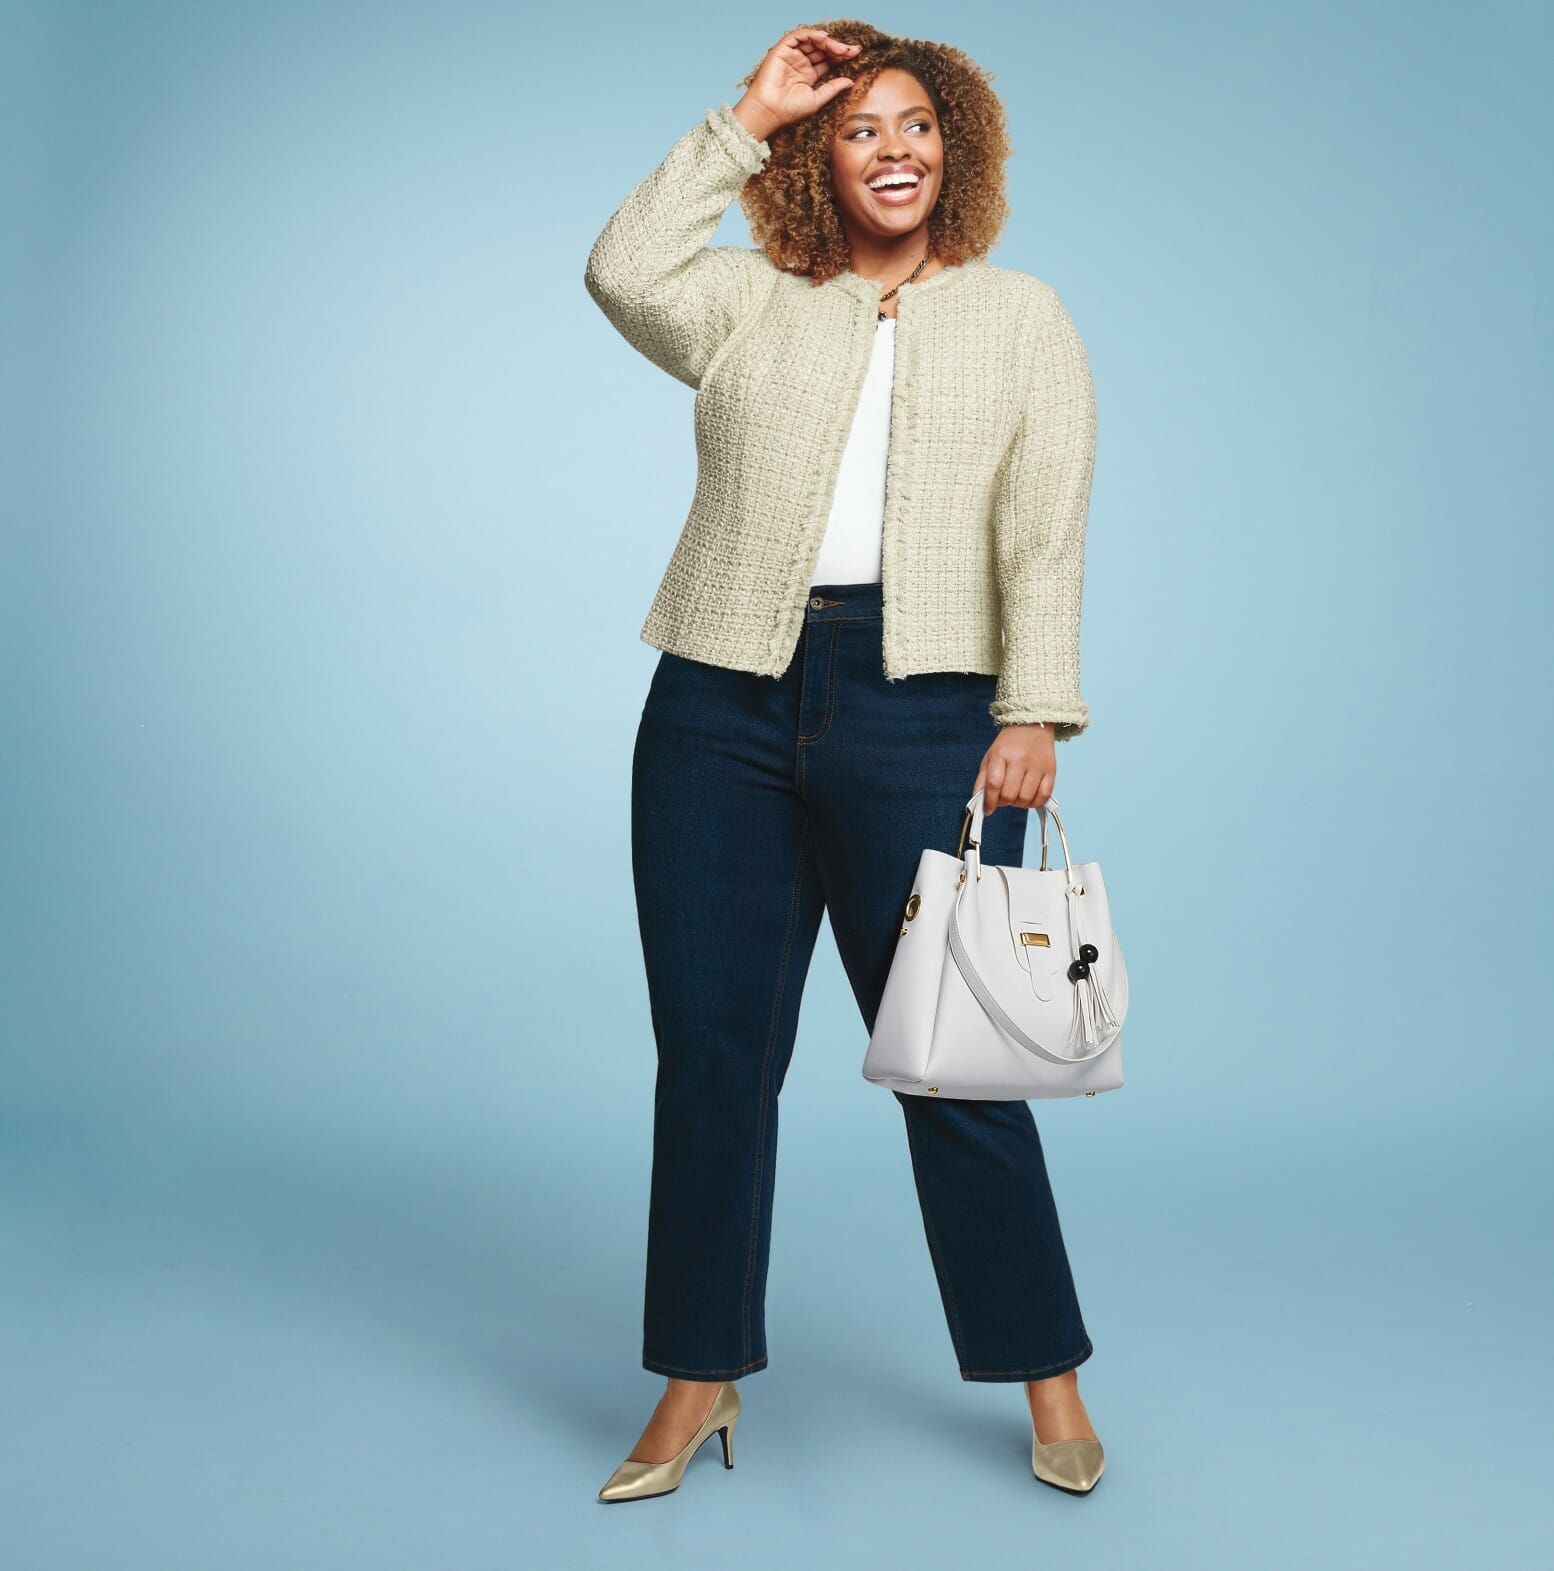 plus-size model wearing a cream jacket with jeans and a white purse.